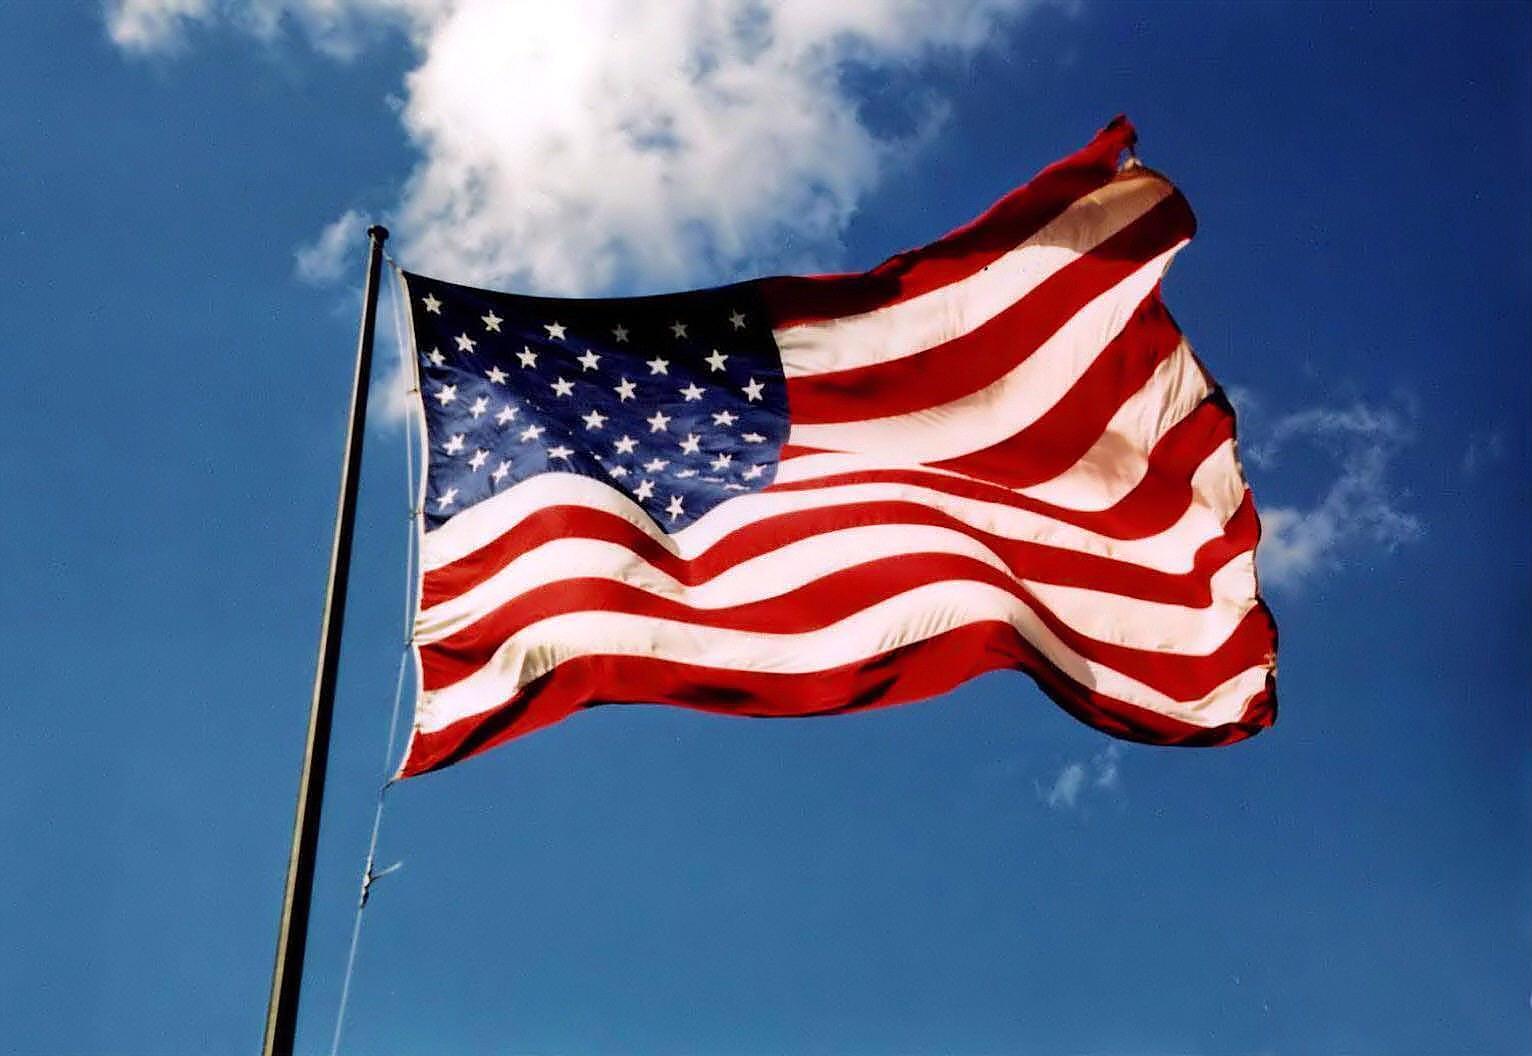 free-e-book-on-how-to-properly-display-the-american-flag-event-resources-inc